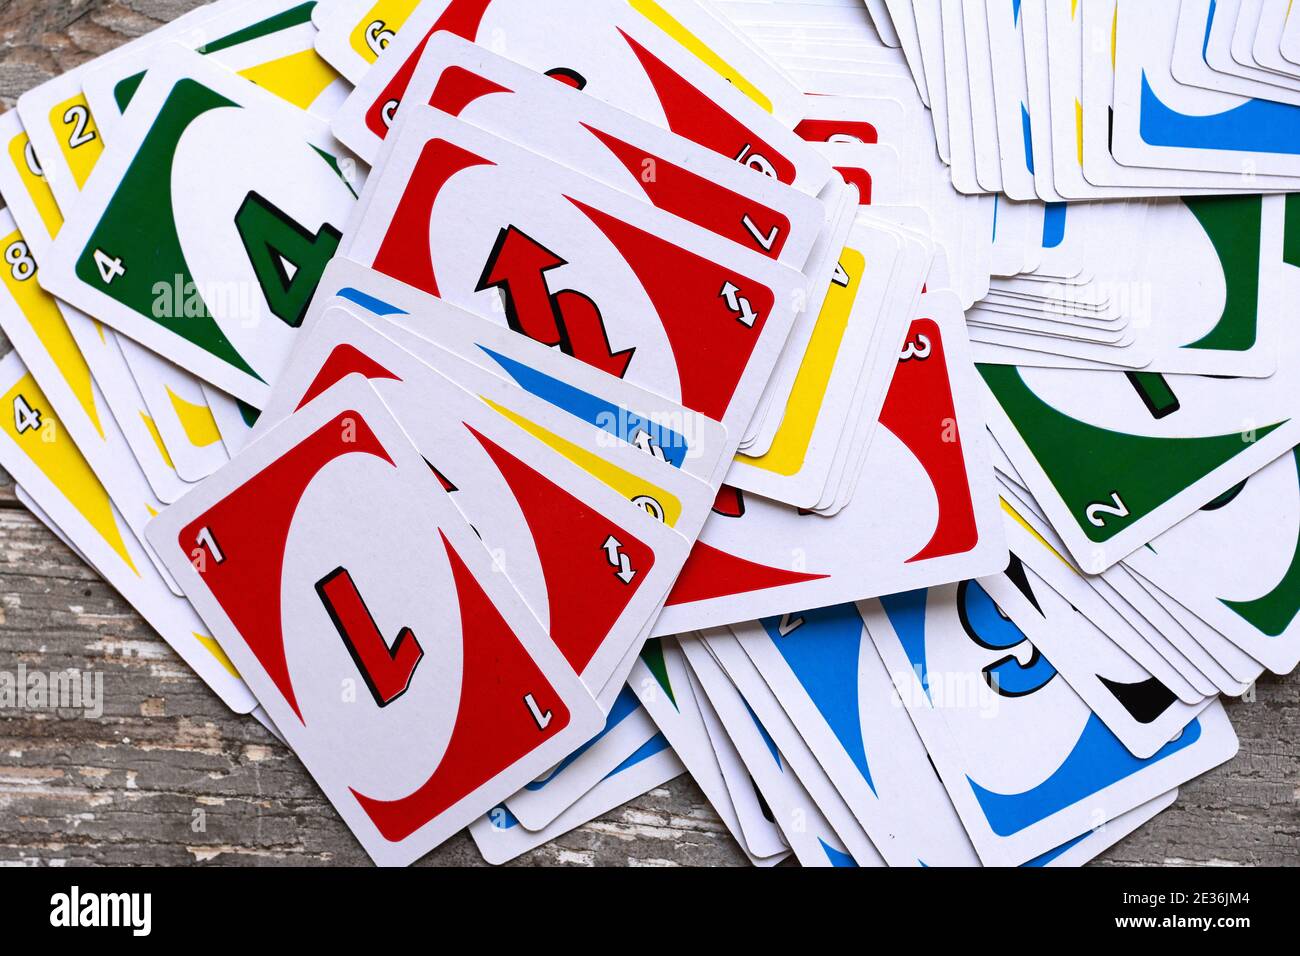 Deck of Uno Game Cards Scattered All Over on a Table. American